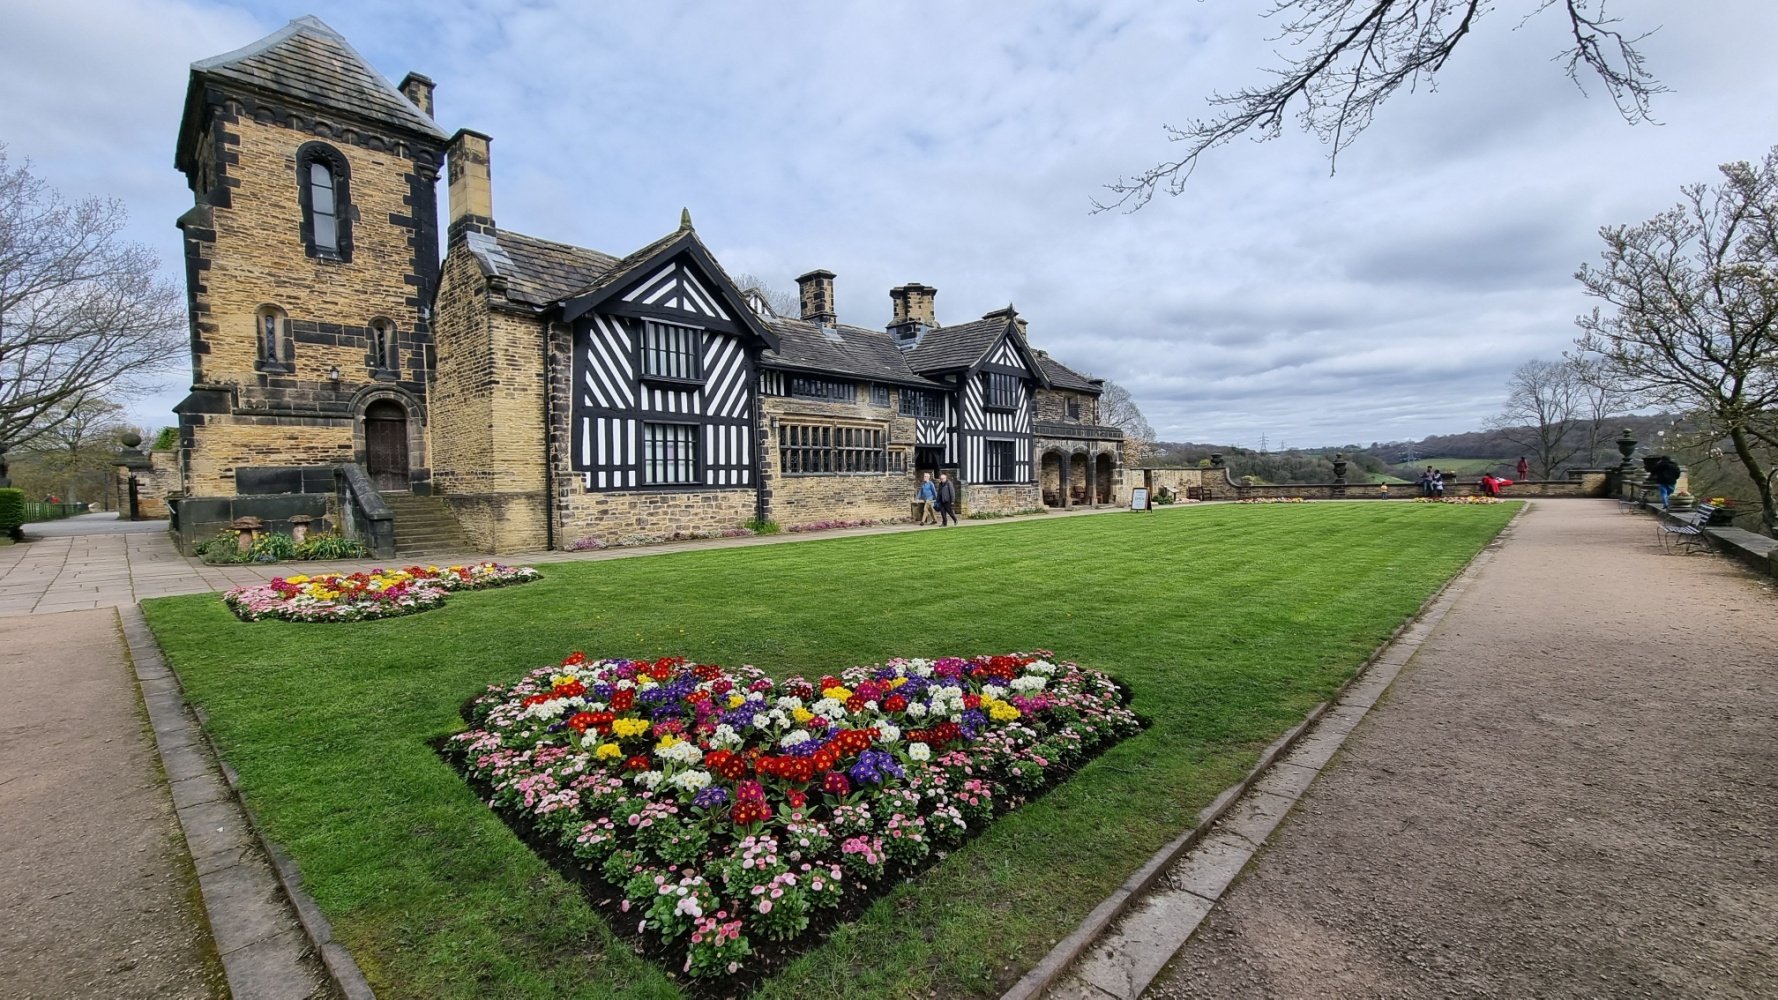 Image name shibden hall halifax west yorkshire the 18 image from the post A look at the history of Shibden Hall, with Dr Emma Wells in Yorkshire.com.